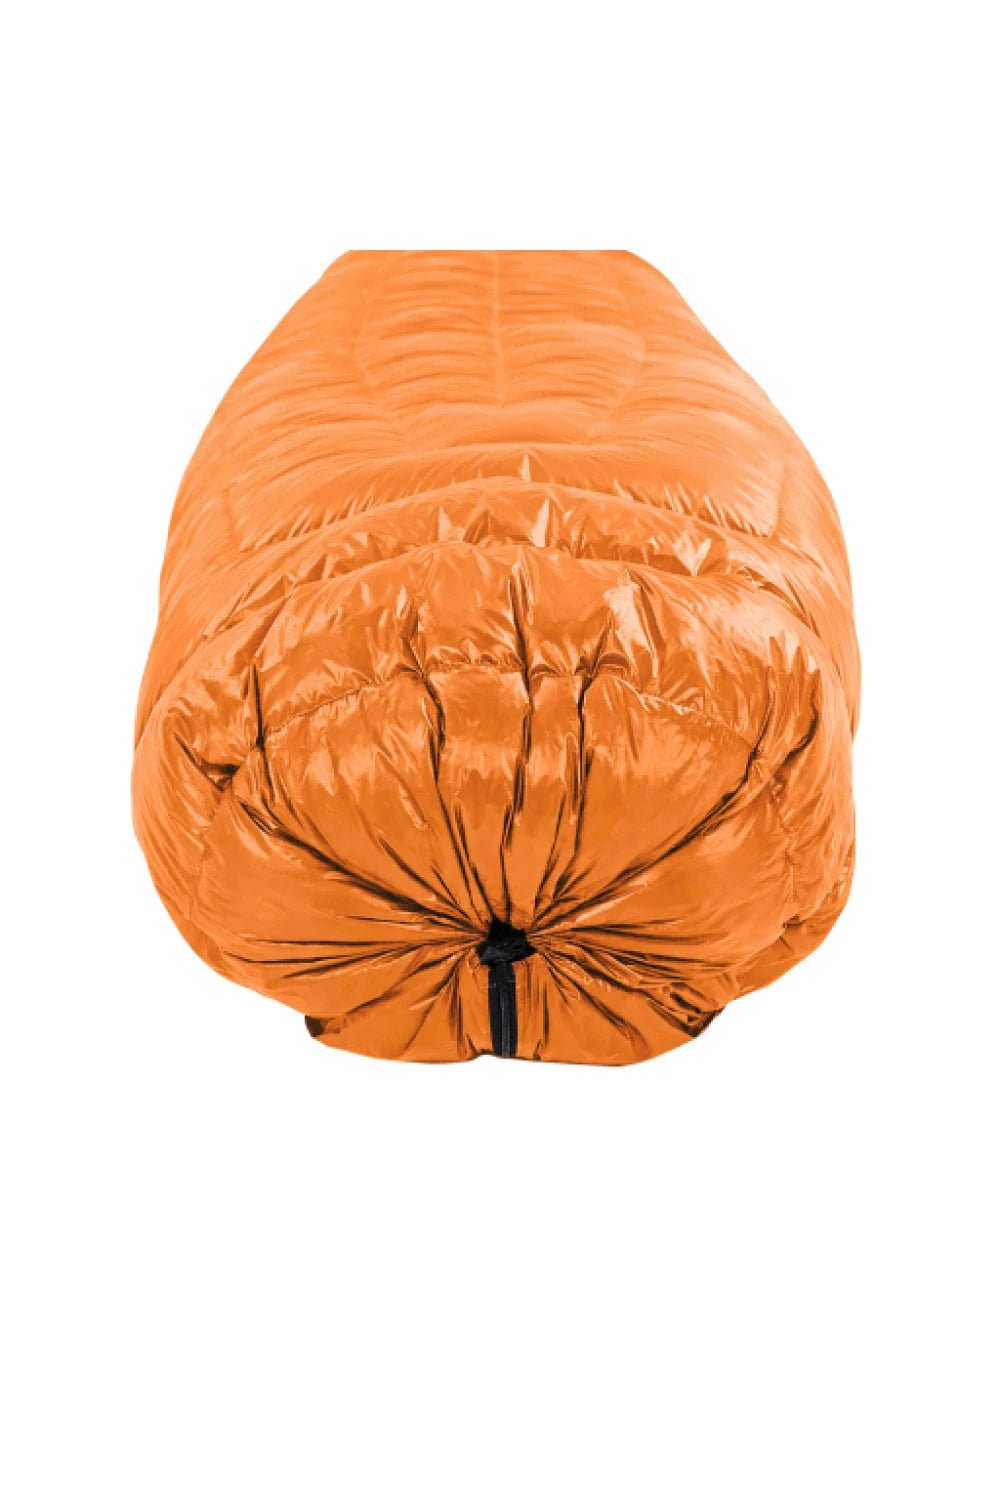 Enlightened Equipment Revelation Quilt 950 Fill Down - Orange / Charcoal | Coffee Outdoors